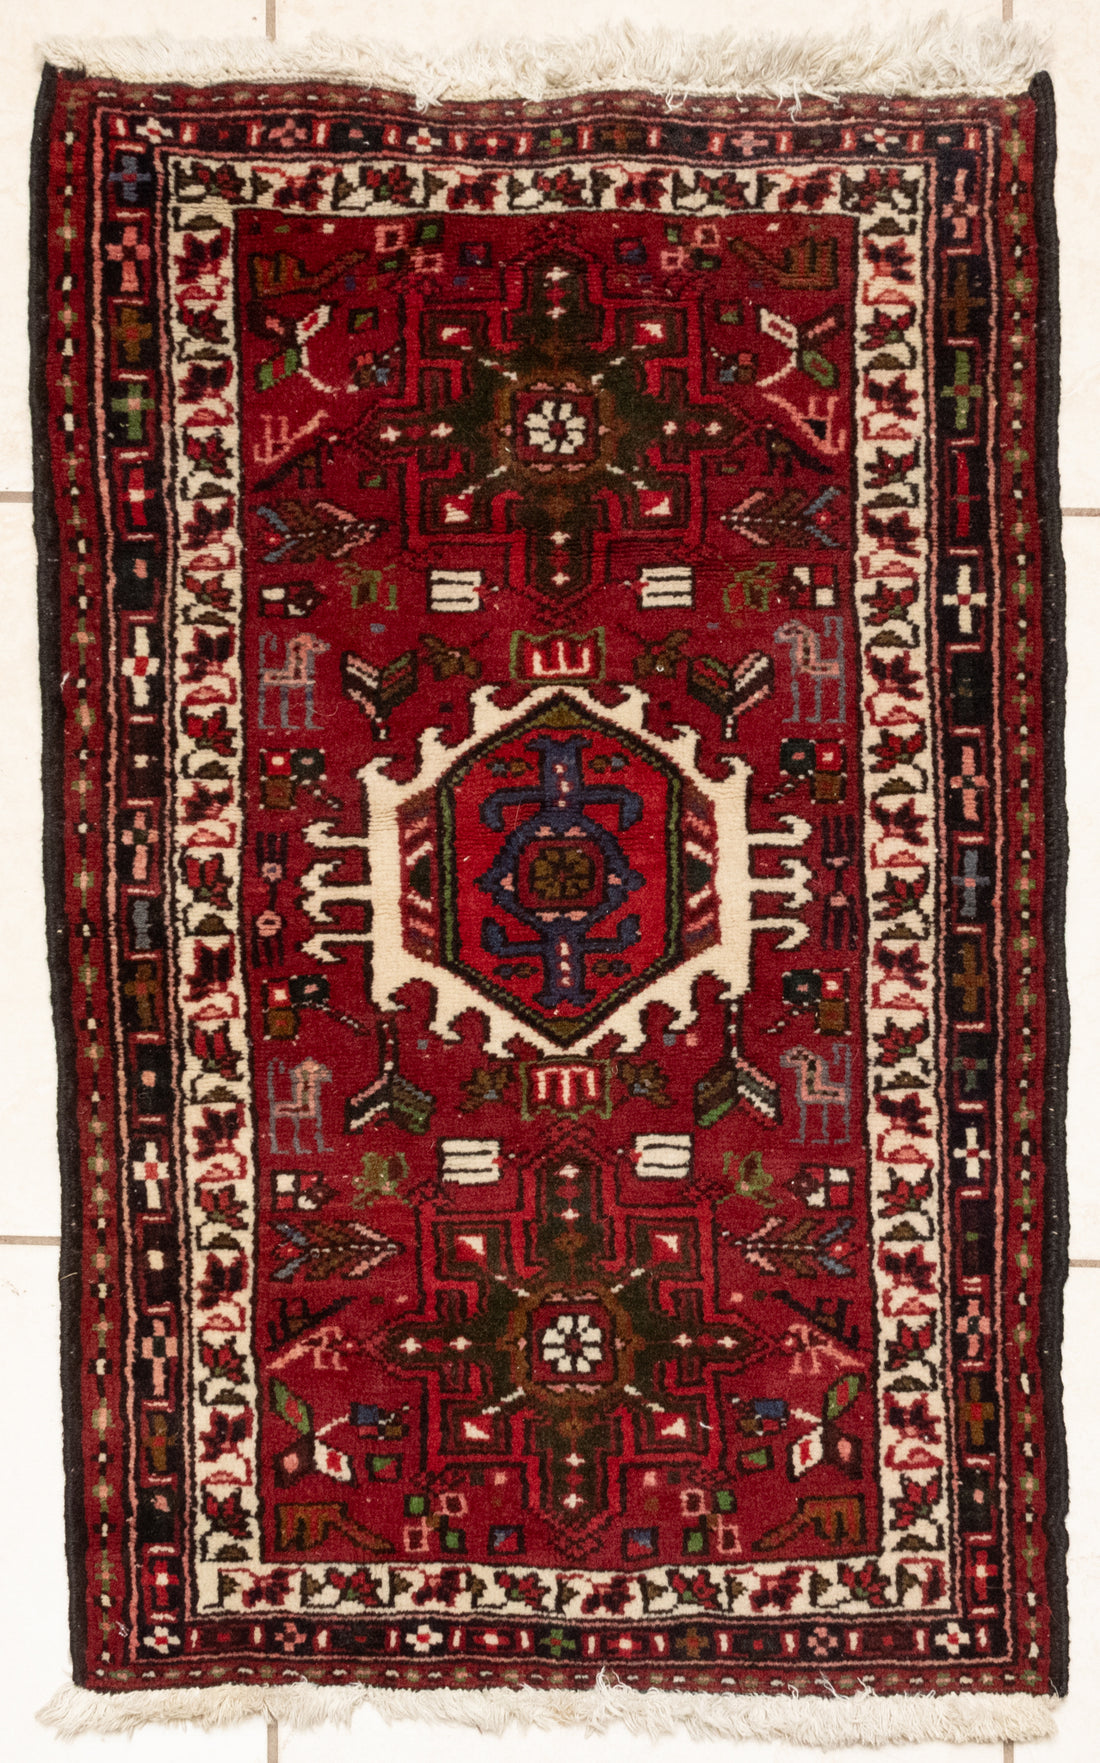 Hand-Knotted Wool Rug 39" x 24"